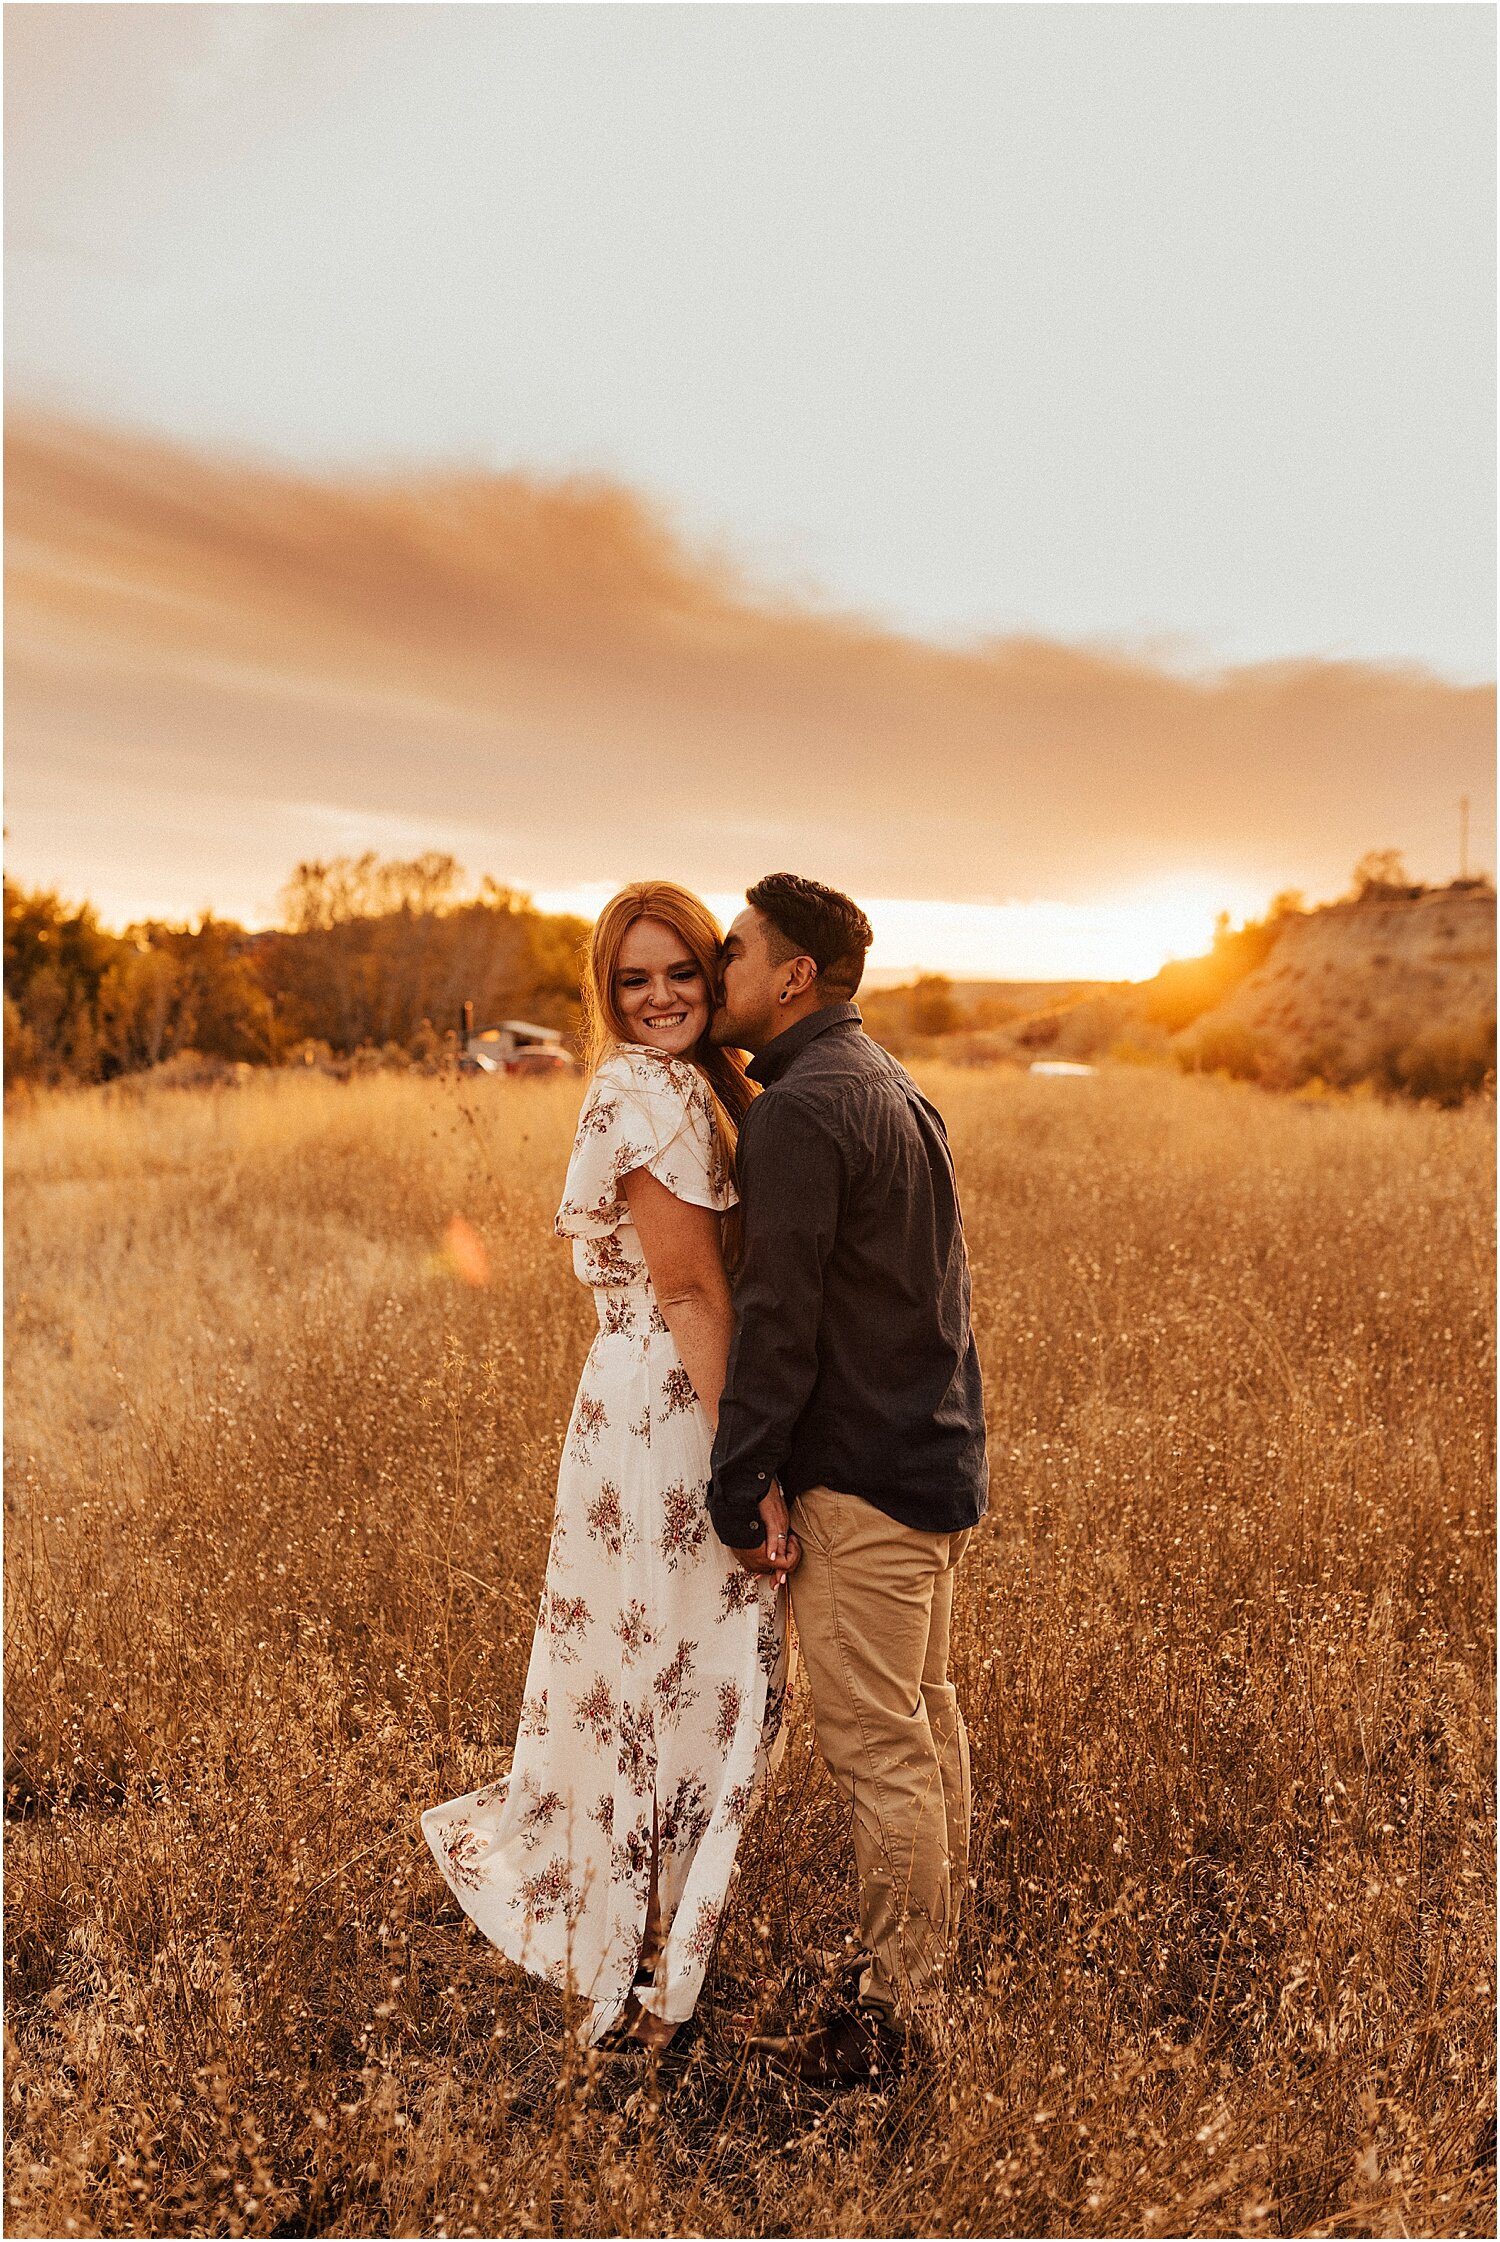 BAR AND DRINKING AND GOLDEN HOUR ENGAGEMENT SESSION41.jpg